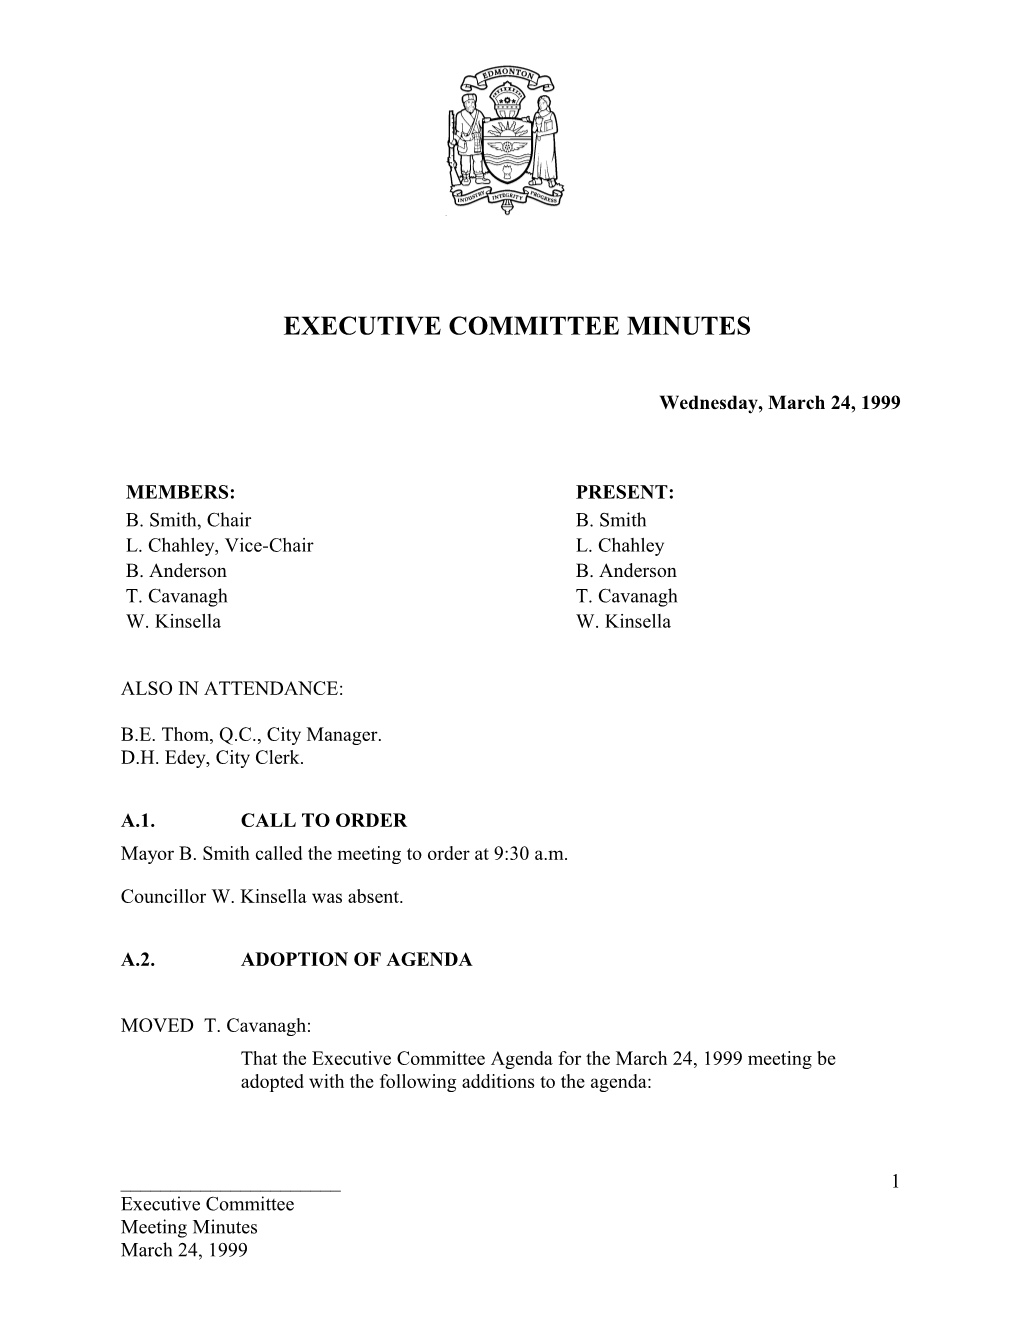 Minutes for Executive Committee March 24, 1999 Meeting